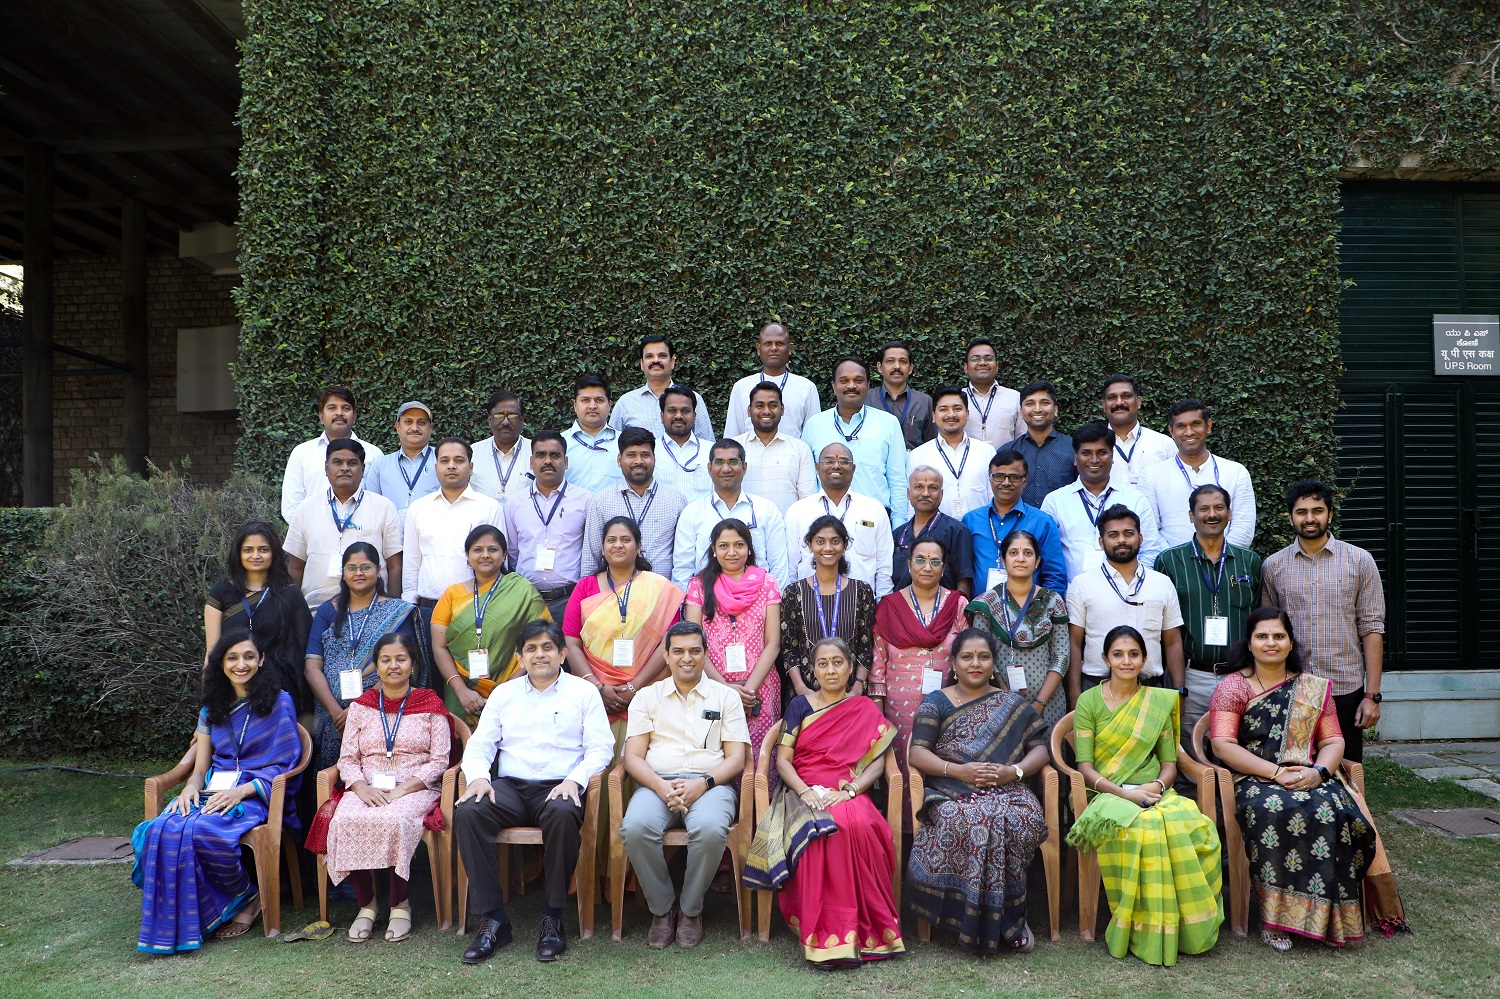 Participants of the Capacity Building Programme for Officers of the Commercial Taxes Department, Government of Karnataka, on 13th February 2023.